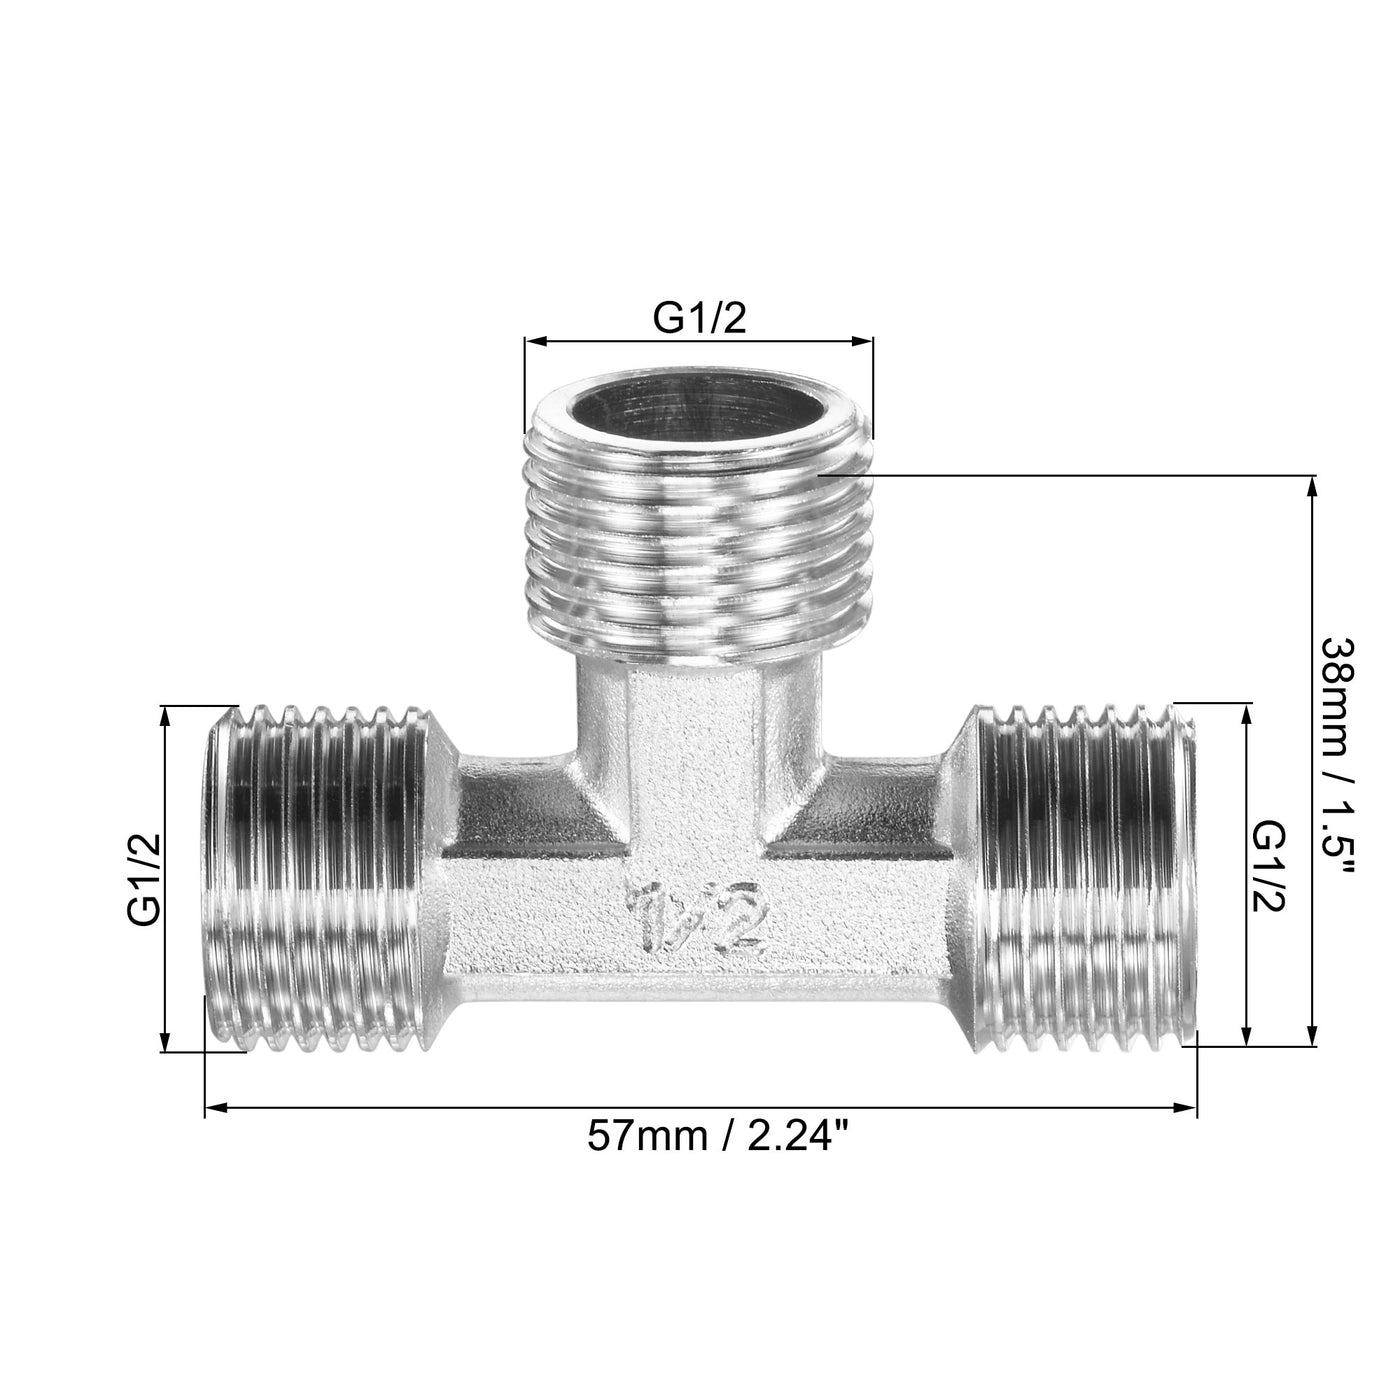 uxcell Uxcell Pipe Fitting Tee G1/2 Male Thread 3 Way T Shape Hose Connector Adapter, Nickel-Plated Copper